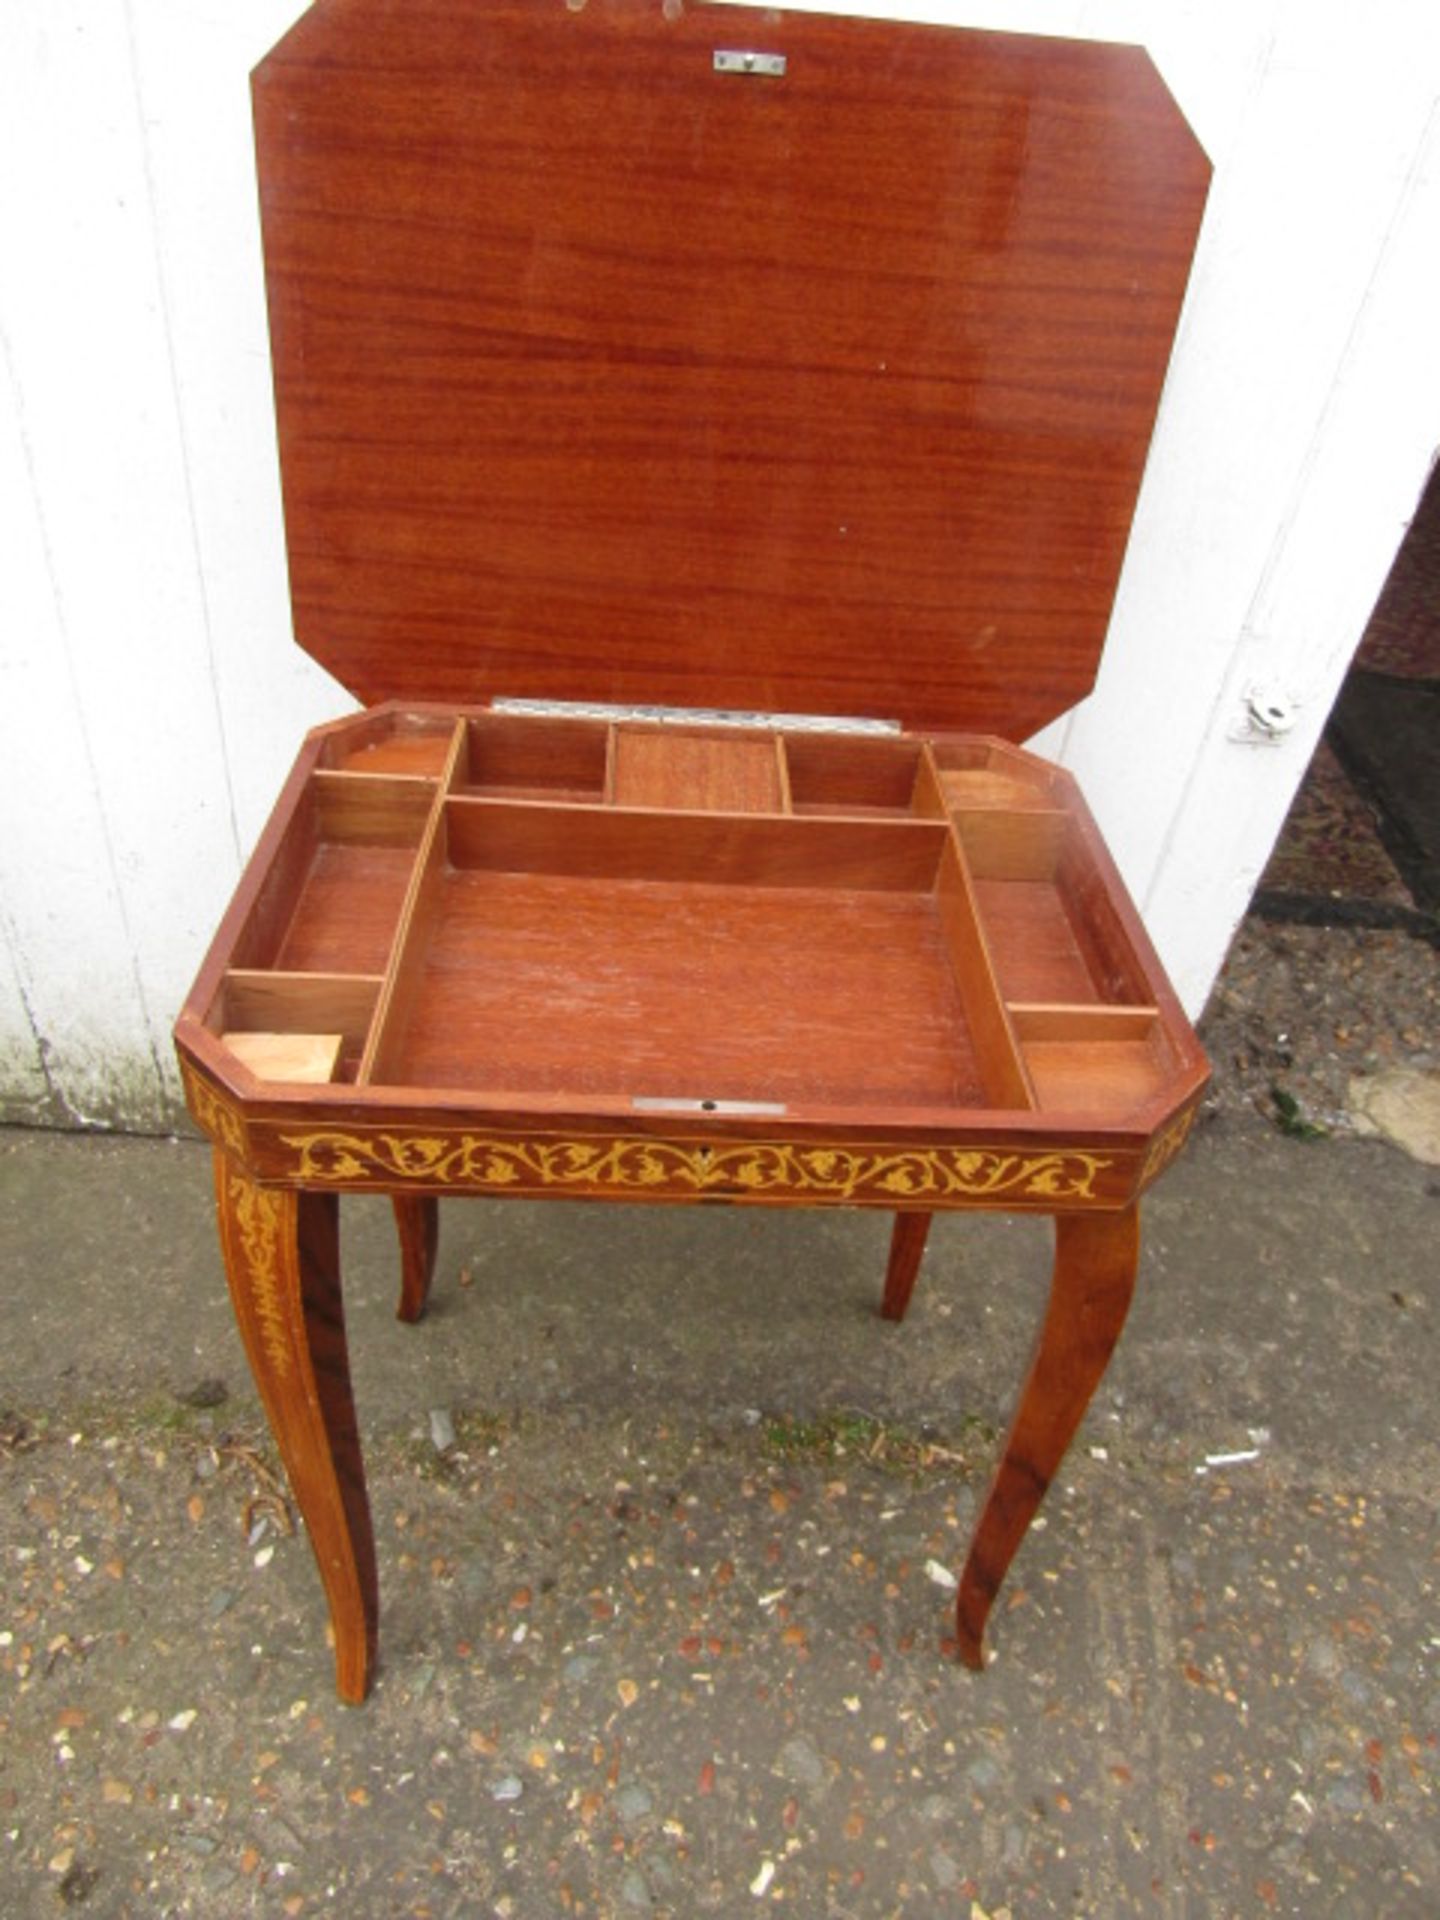 Musical inlaid sewing box - Image 3 of 3